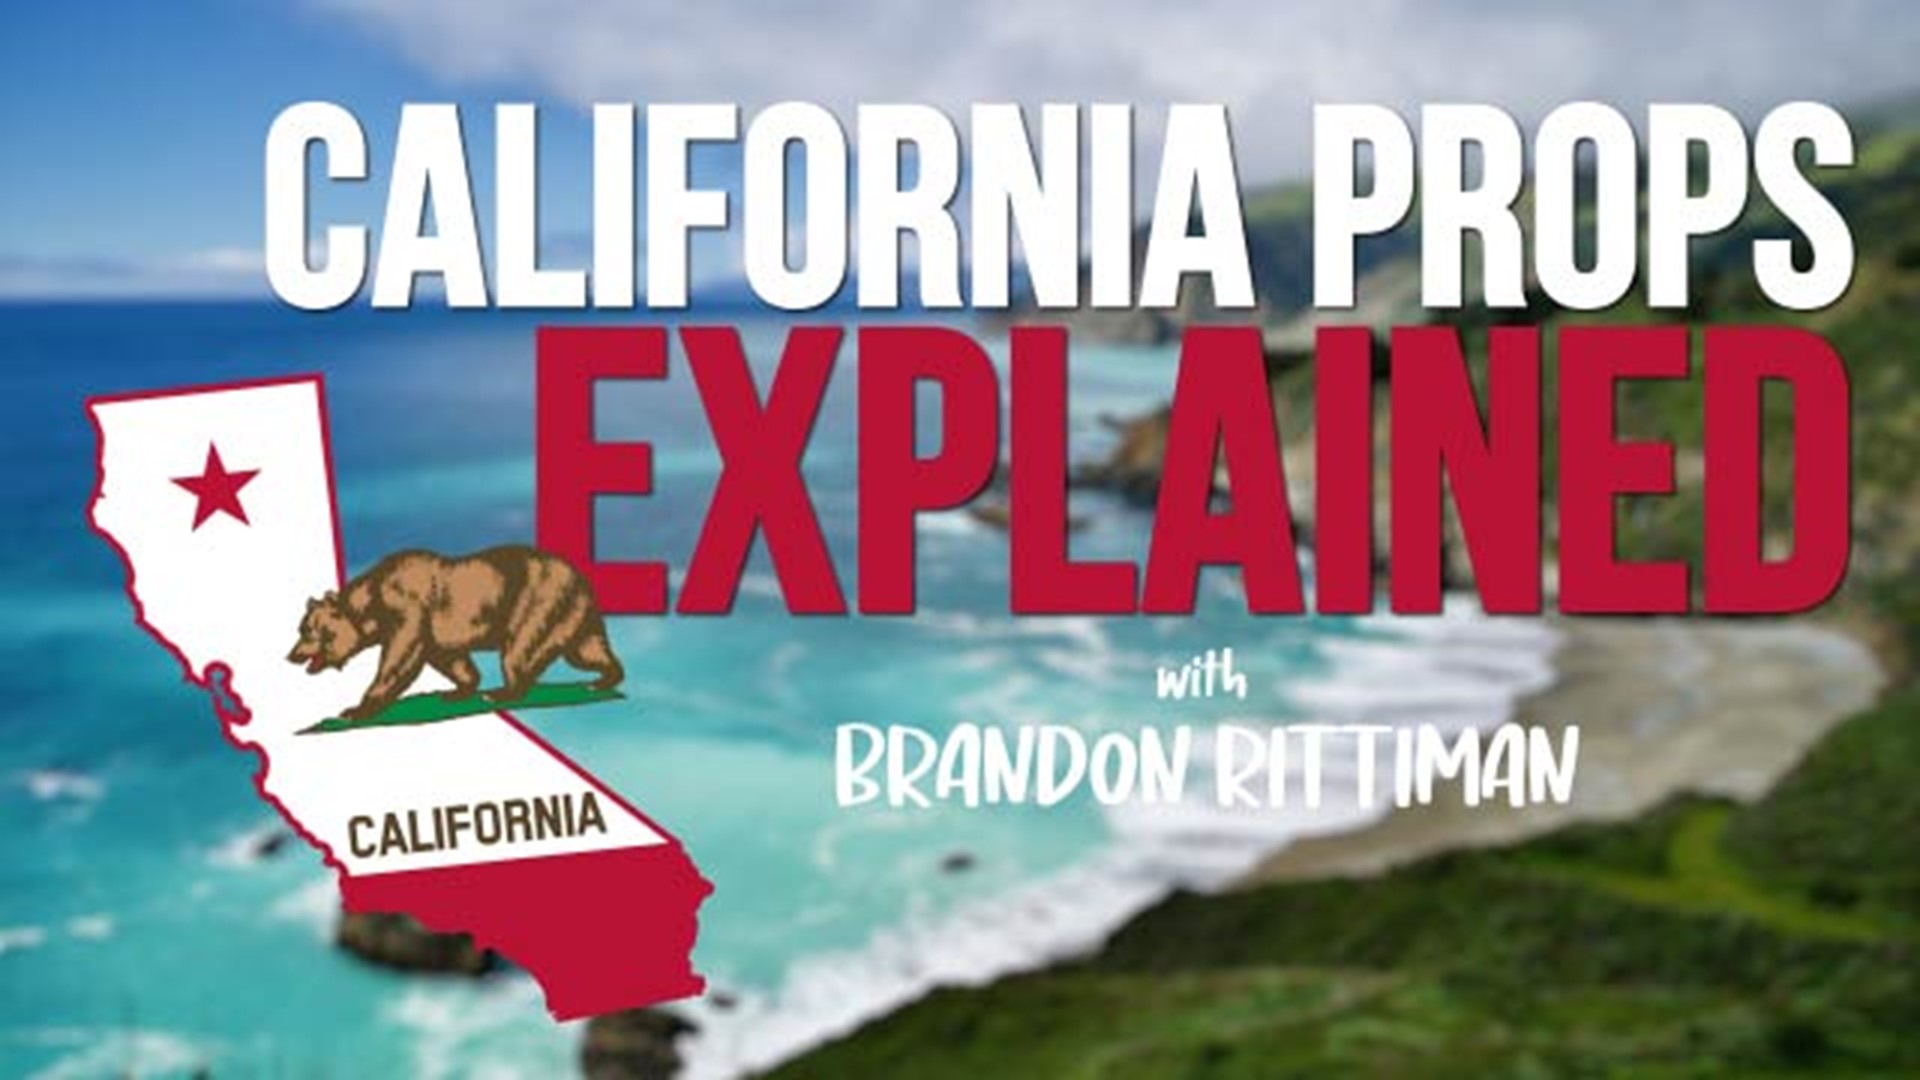 They're back! ABC10's Brandon Rittiman lays out what his series of ballot proposition explainer videos are all about, and how they can help you vote with confidence.